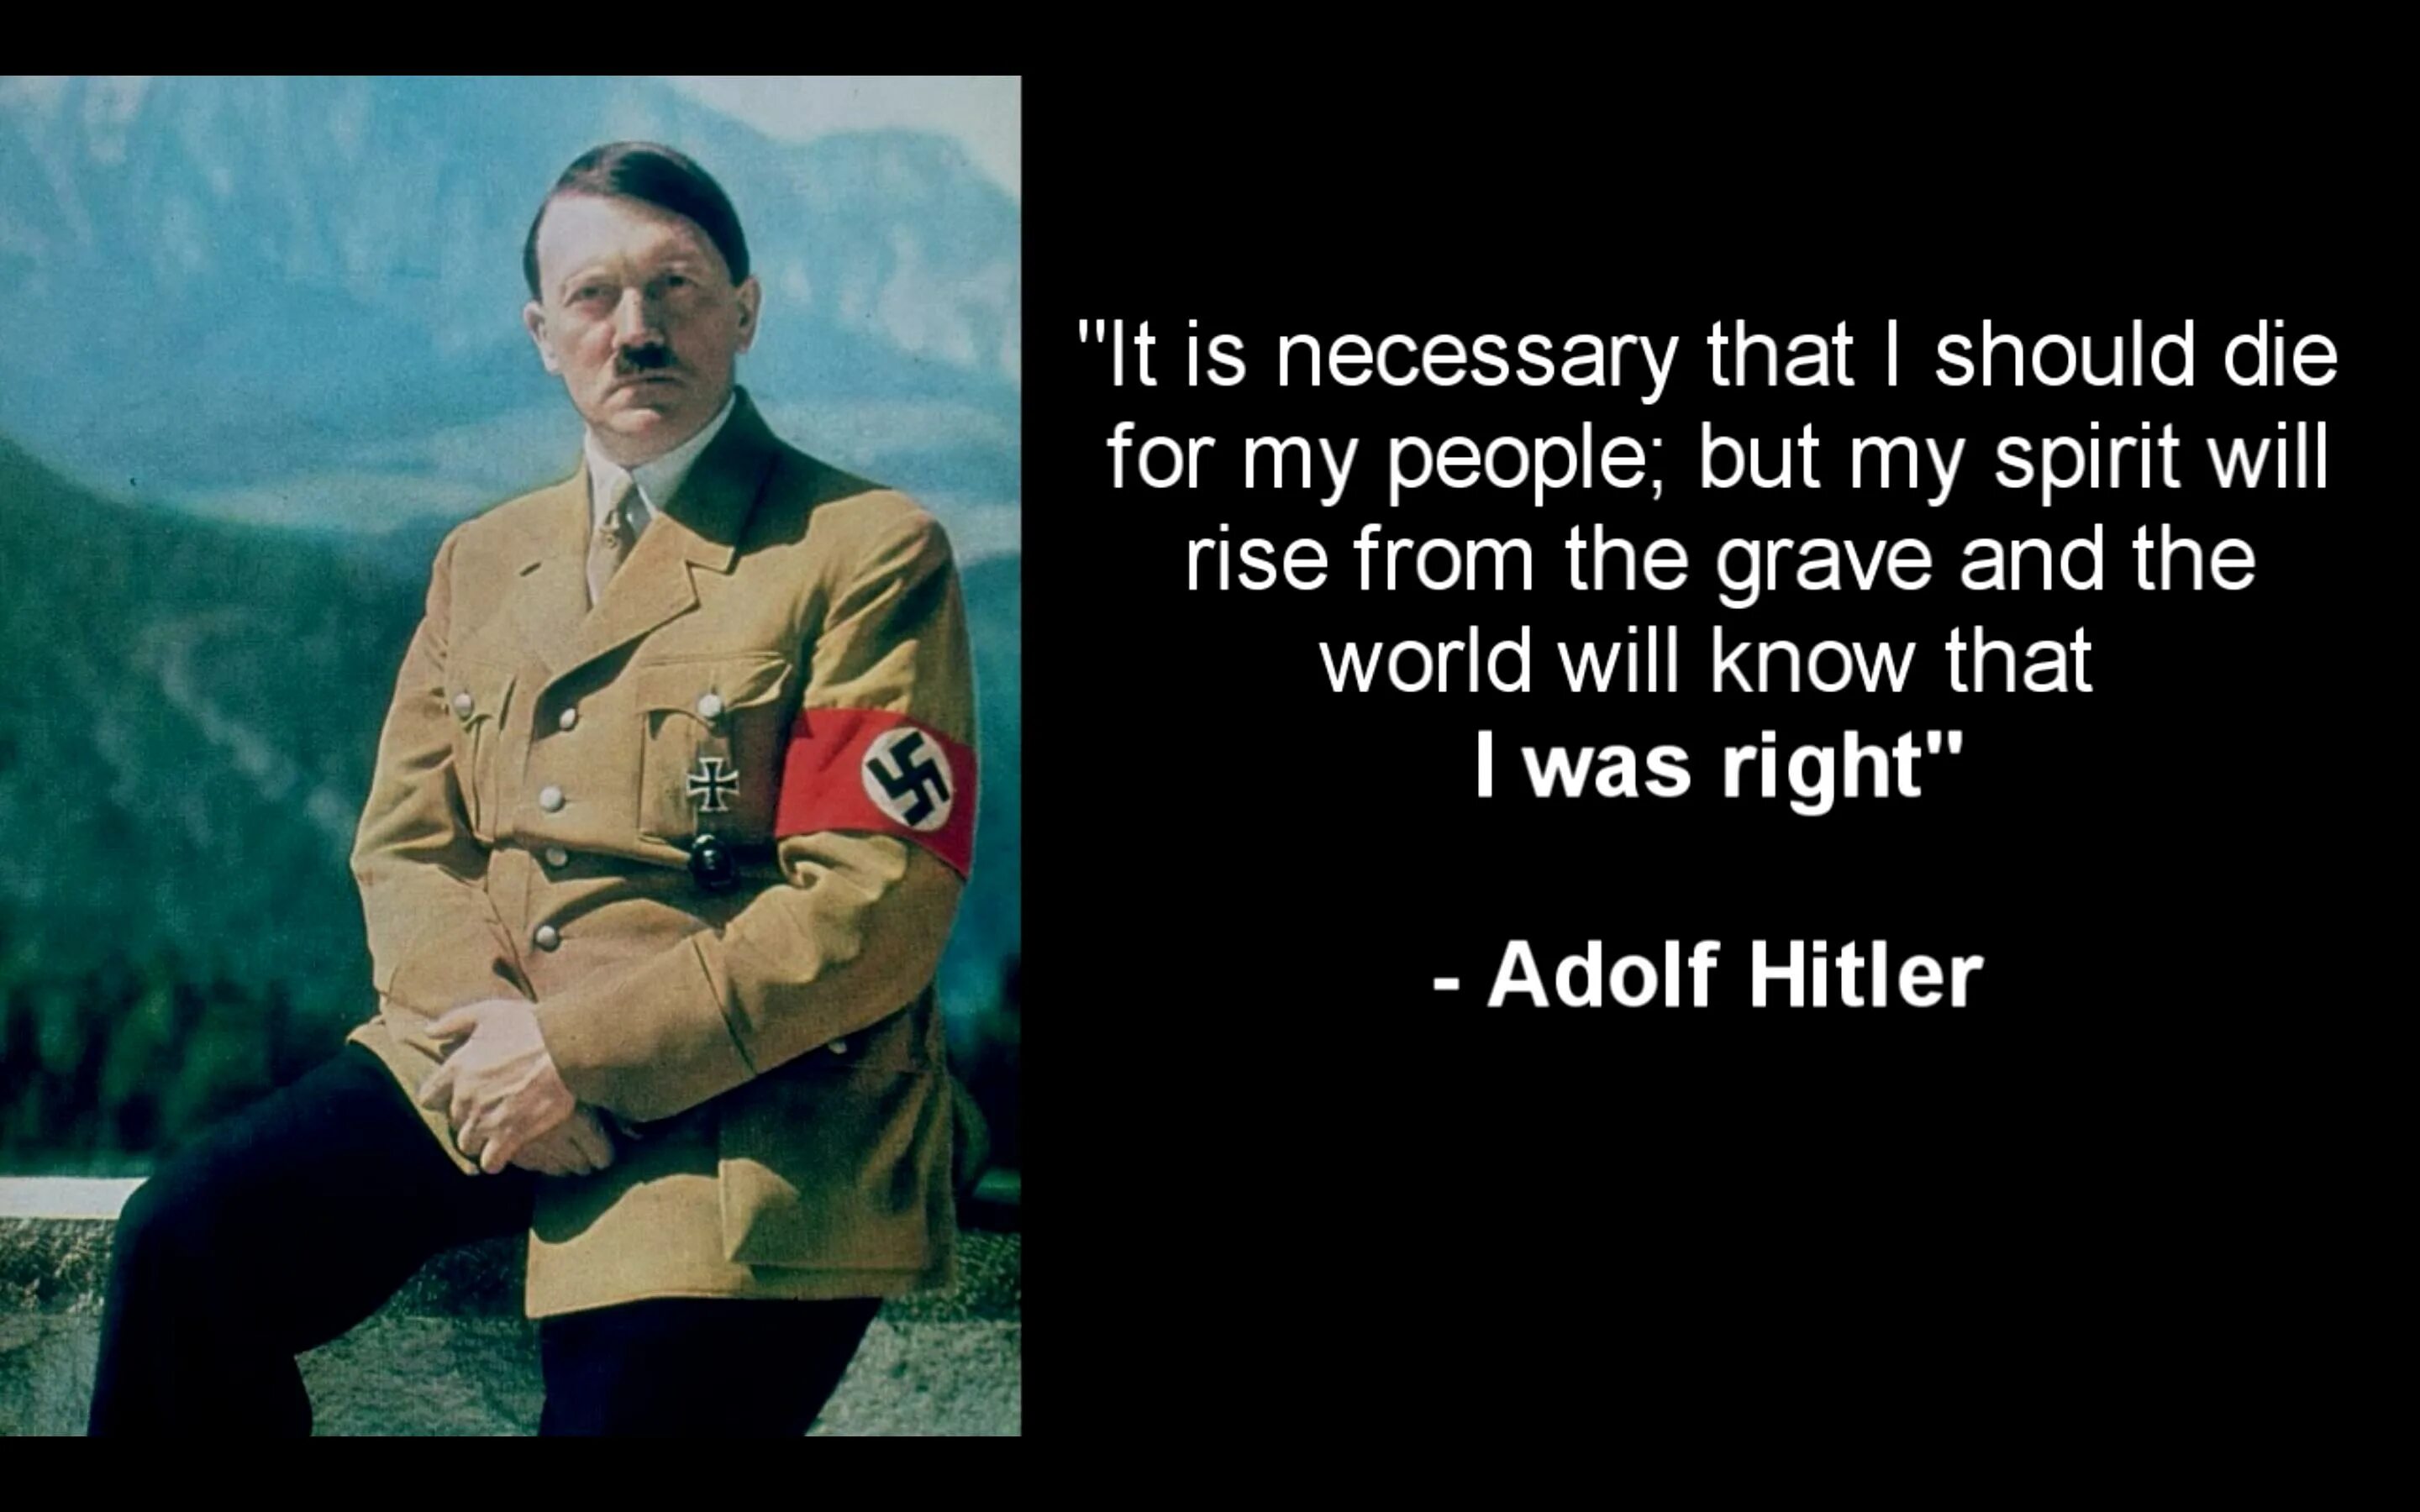 When will the world. Adolf Hitler was right. Adolf Hitler Rise from the Grave.